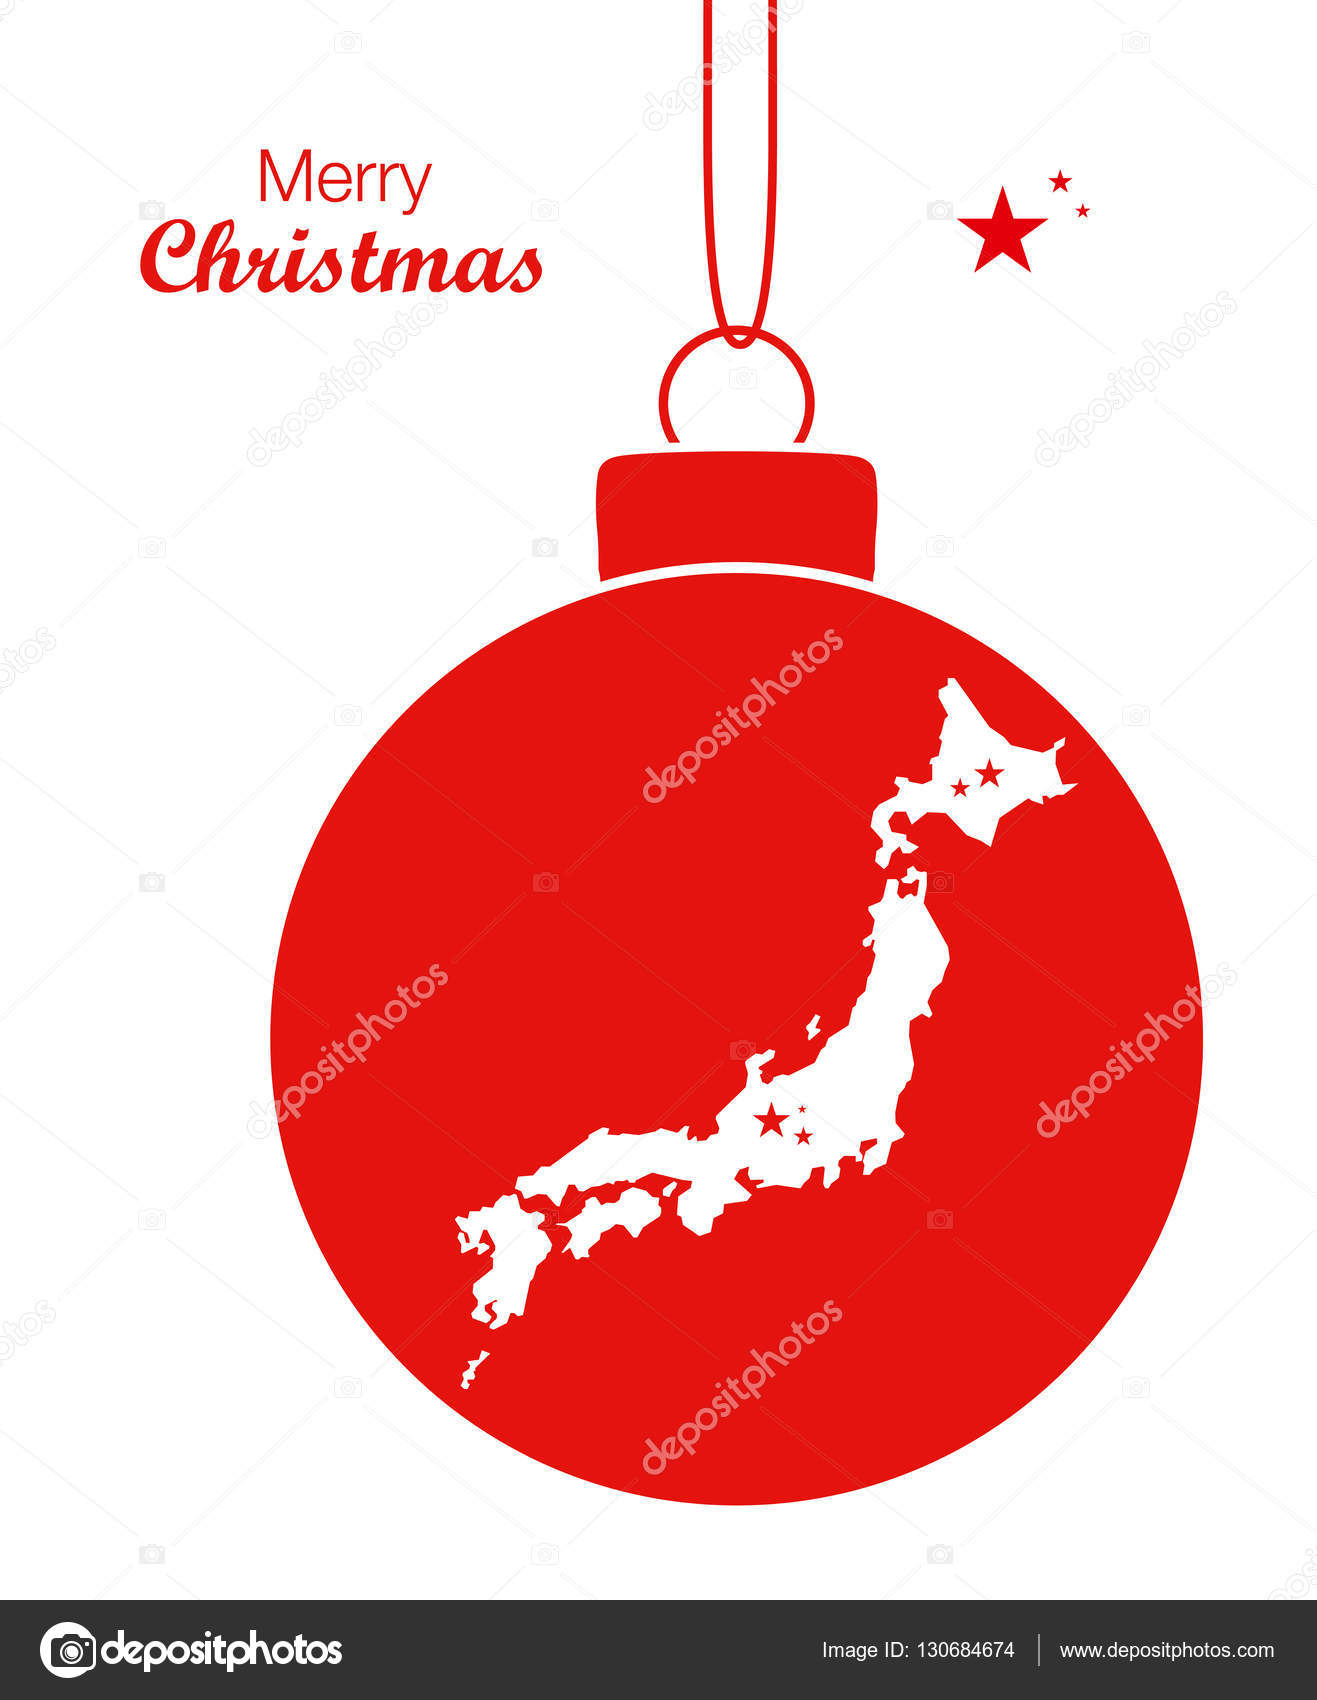 Buon Natale Giapponese.Merry Christmas Illustration Theme With Map Of Japan Stock Vector C Ingomenhard 130684674